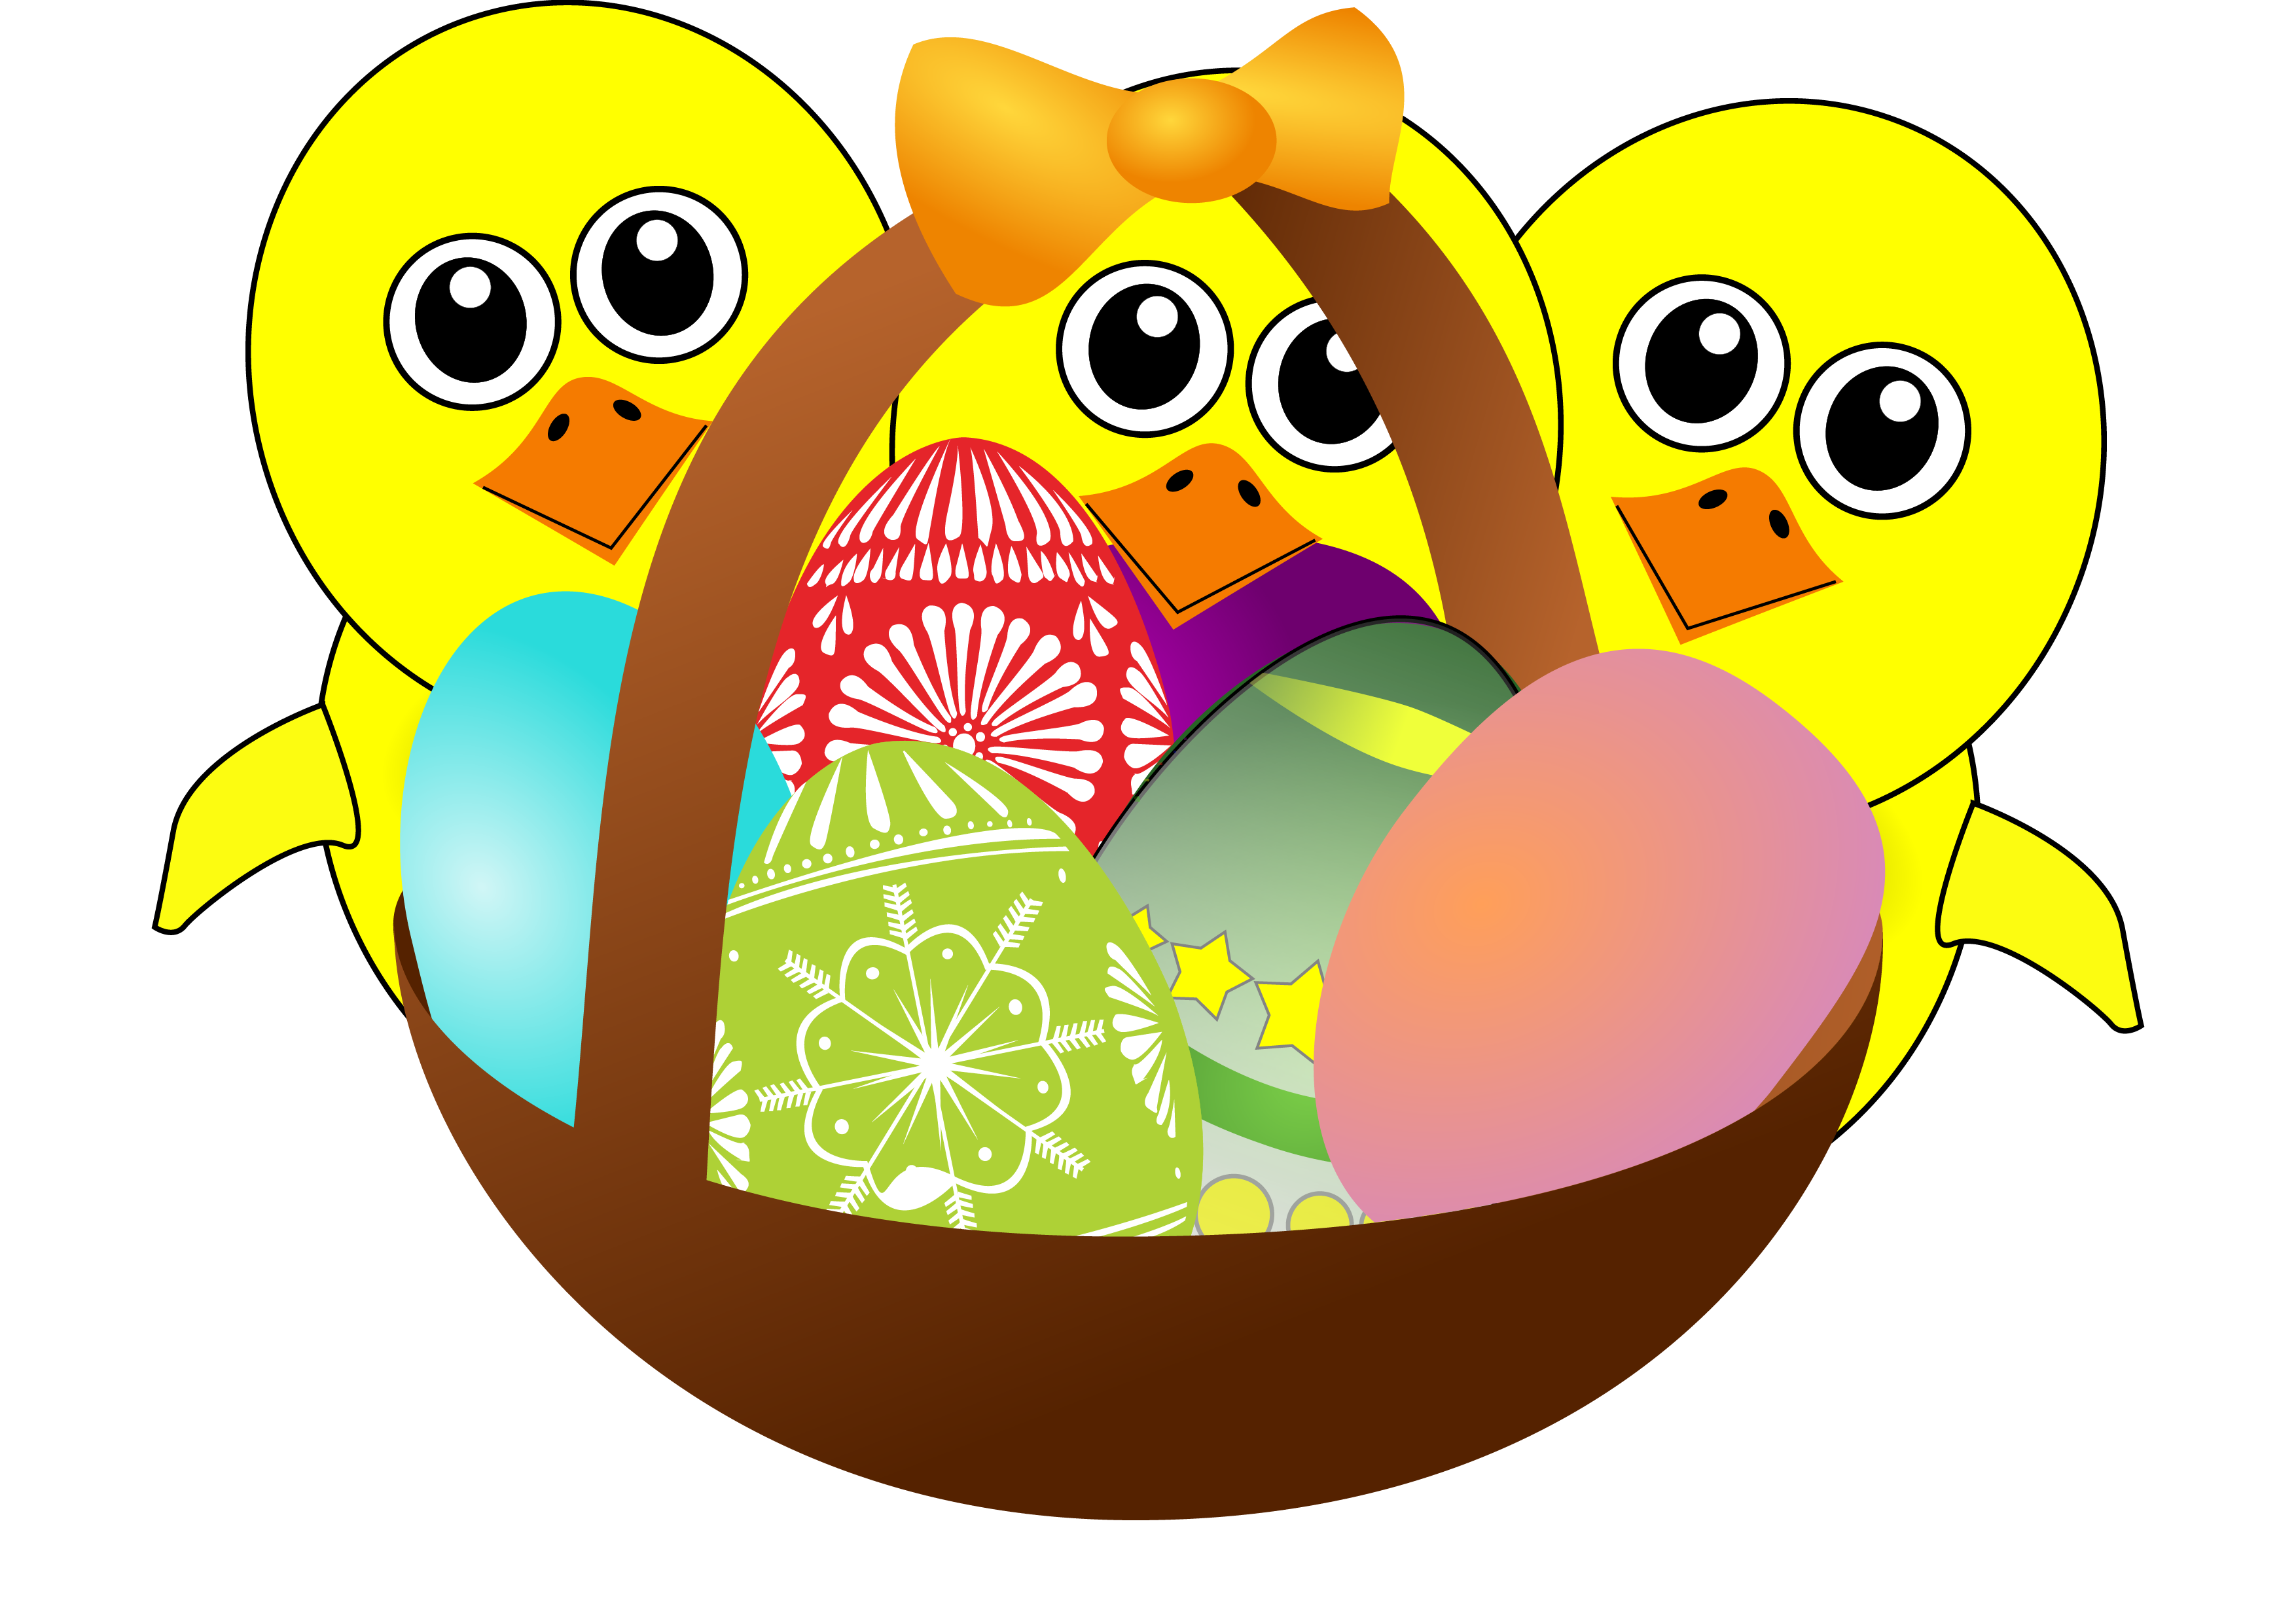 Easter Bunny Chicken Easter egg Cartoon - Easter decorations of eggs ...